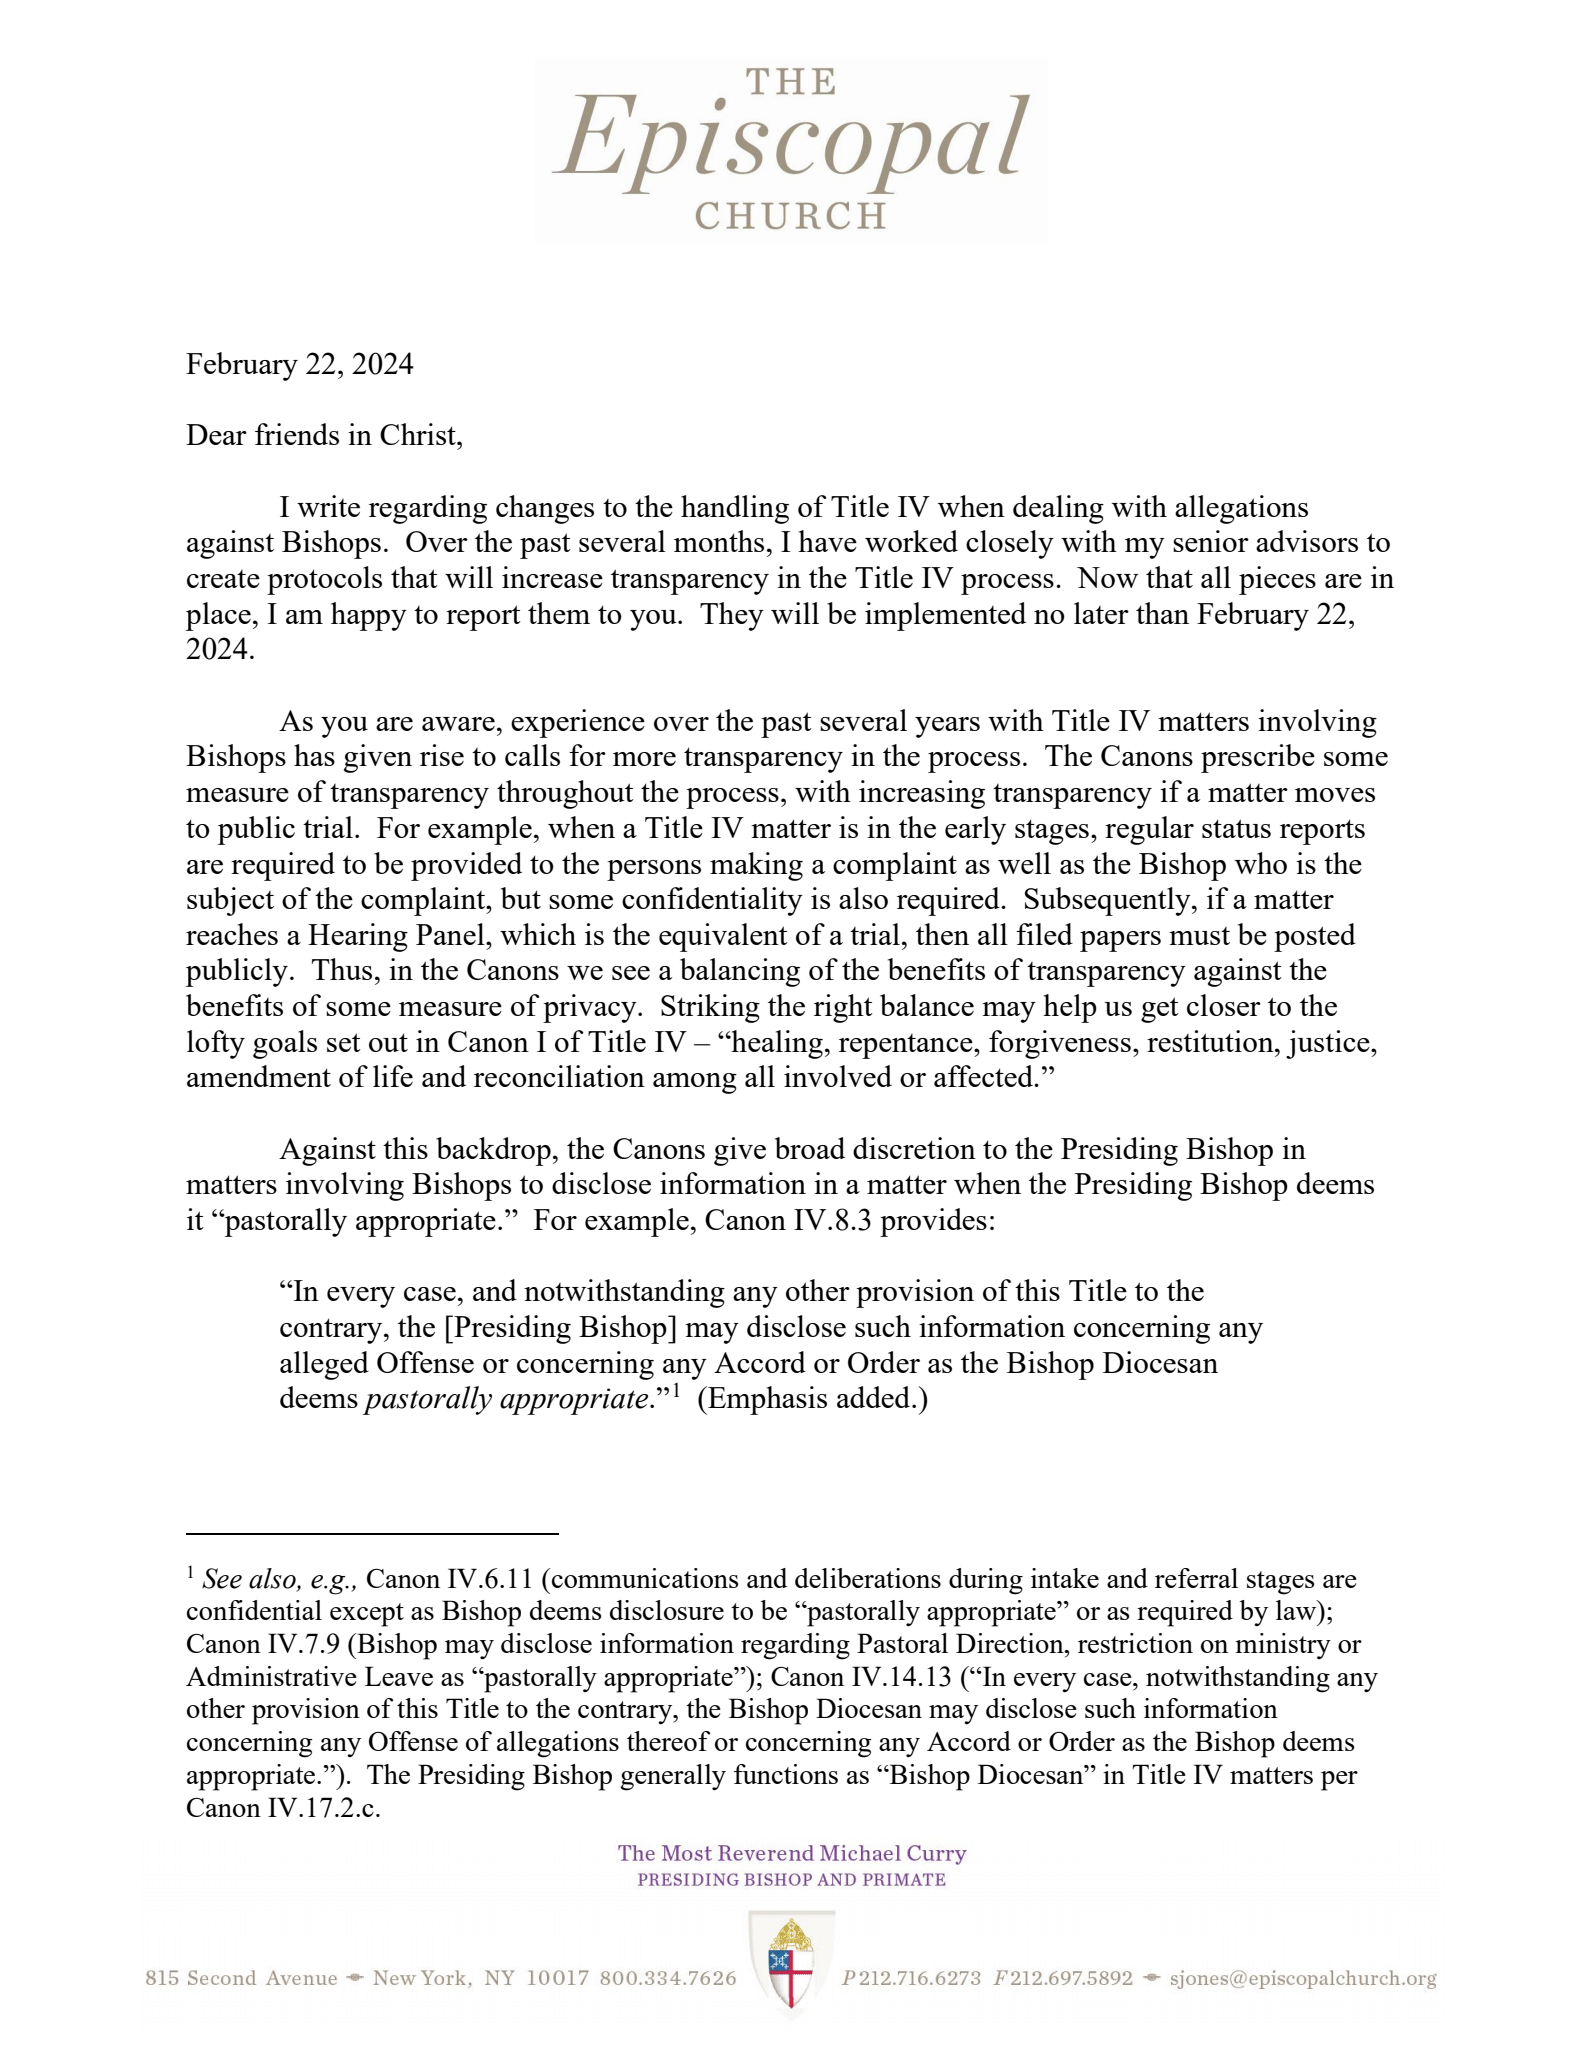 February 22, 2024 letter from Presiding Bishop Curry - Page 1